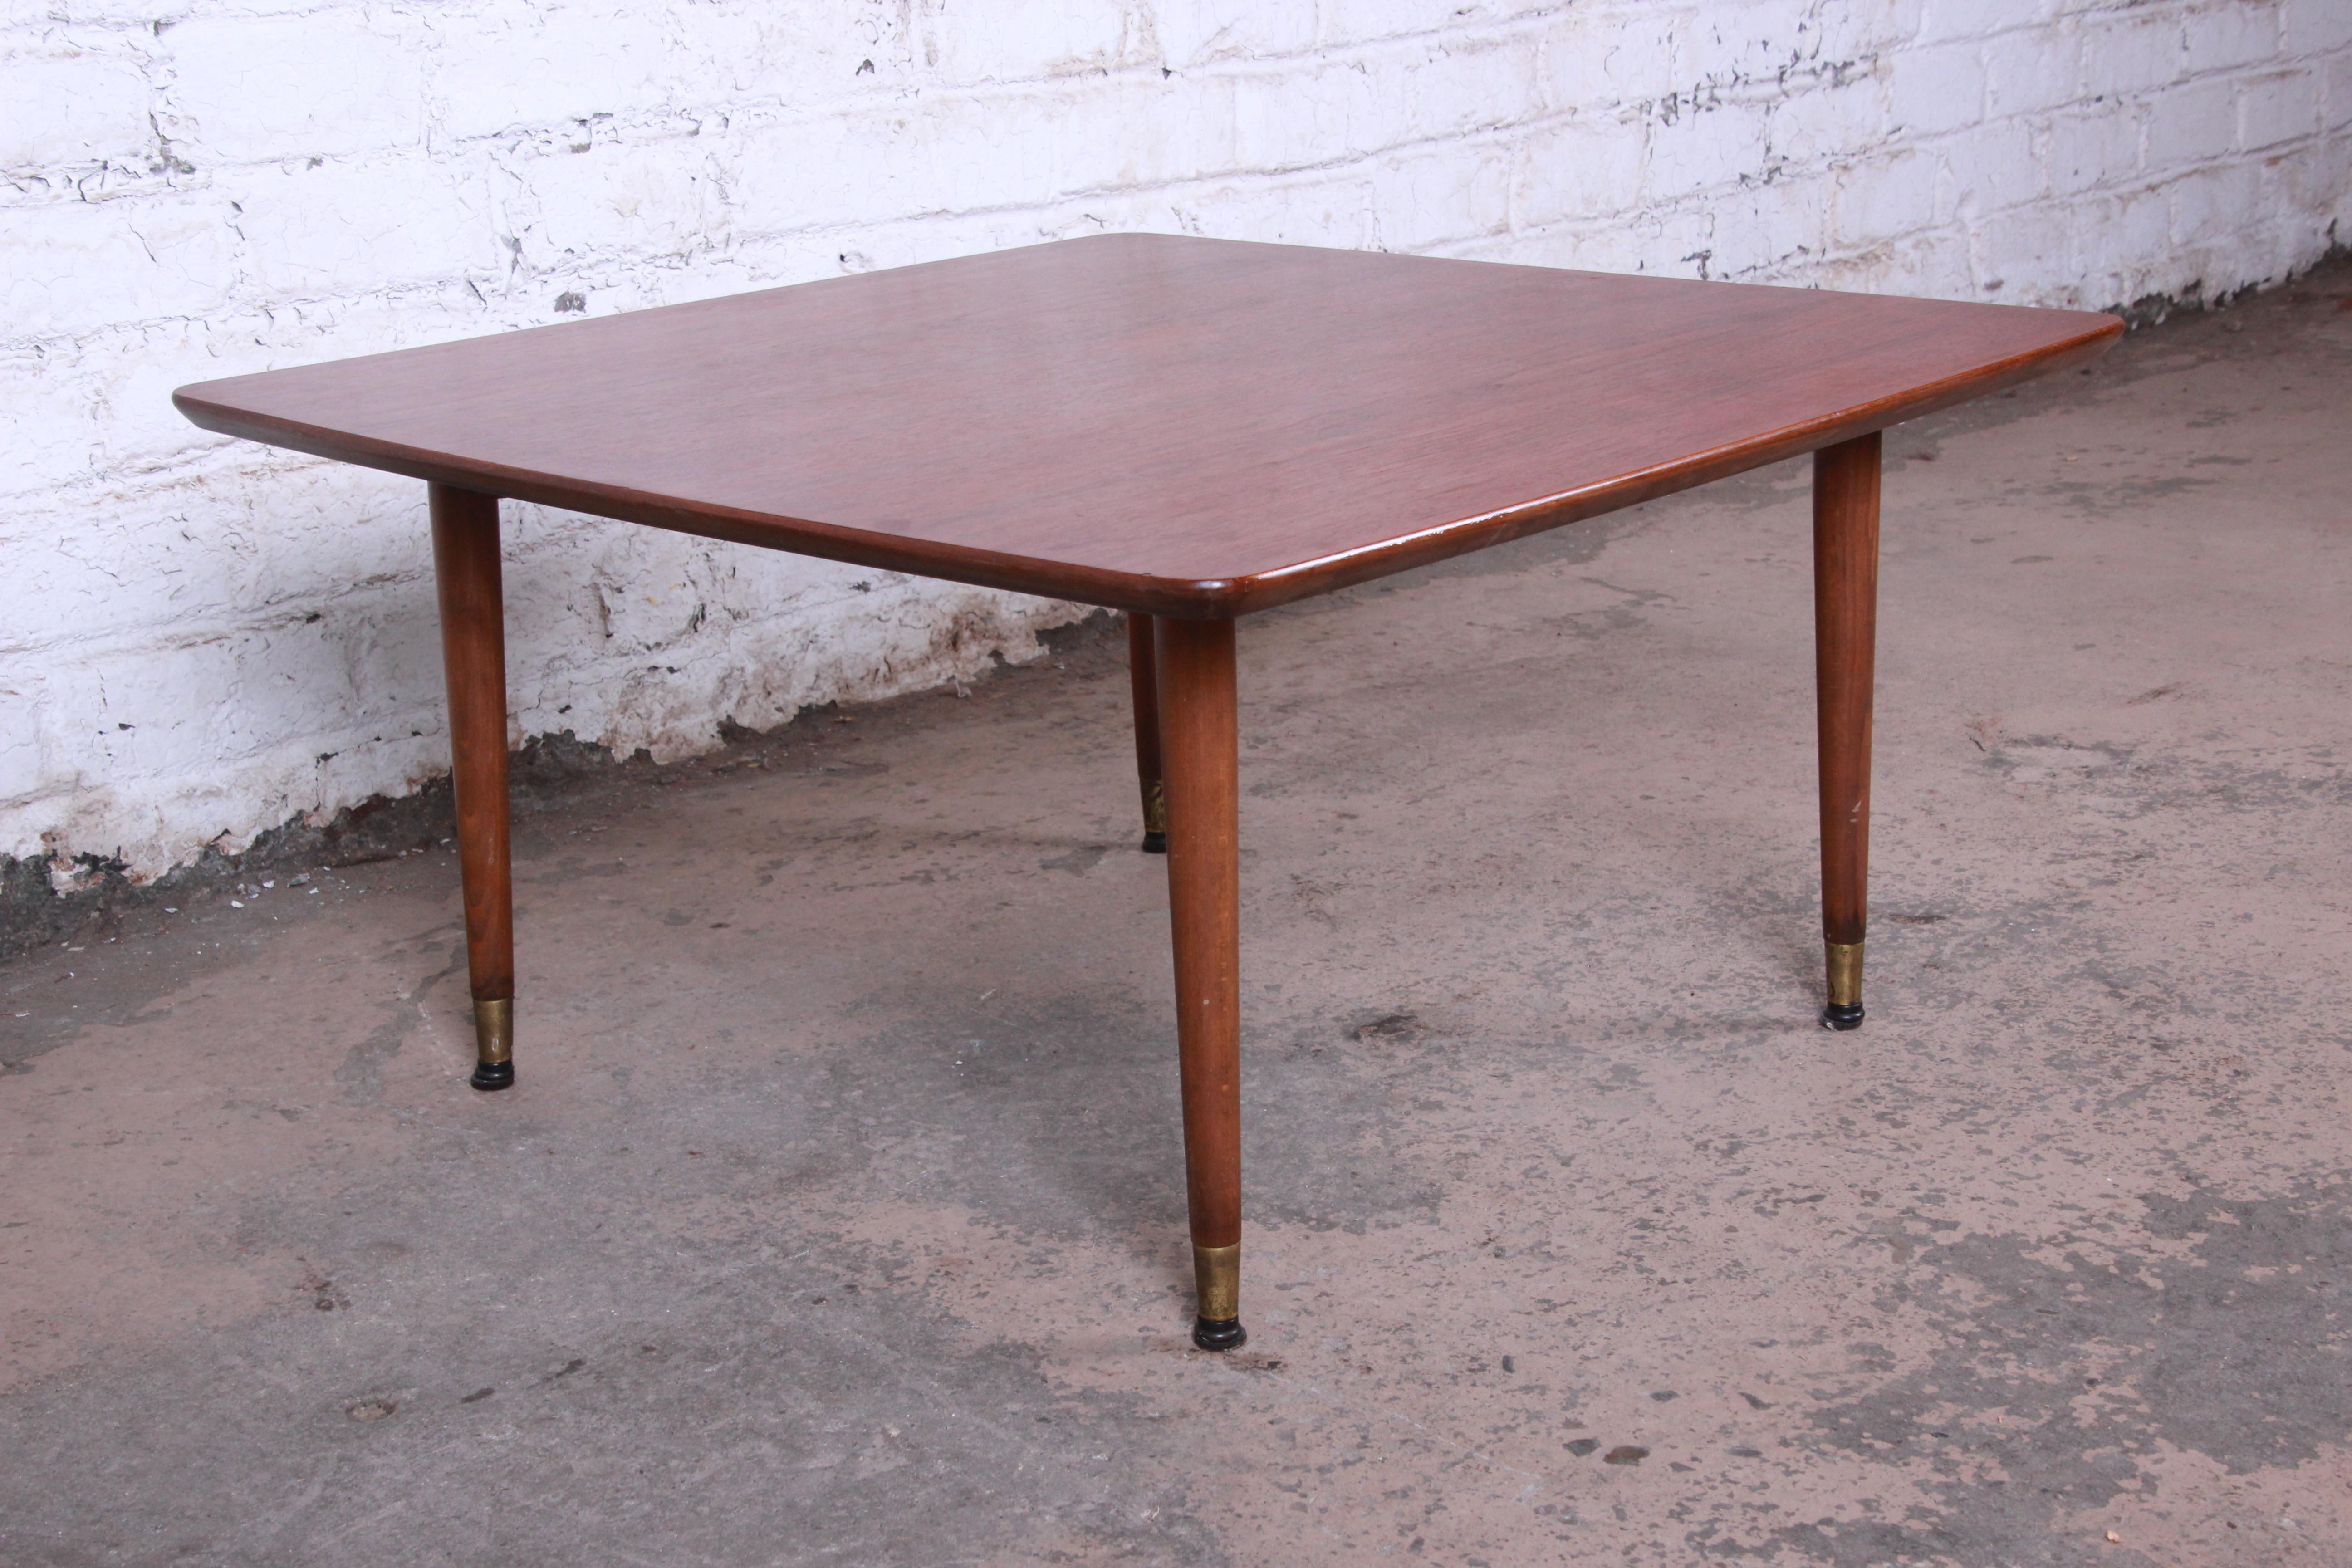 Mid-20th Century Swedish Modern Walnut Coffee Table Attributed to Folke Ohlsson for DUX